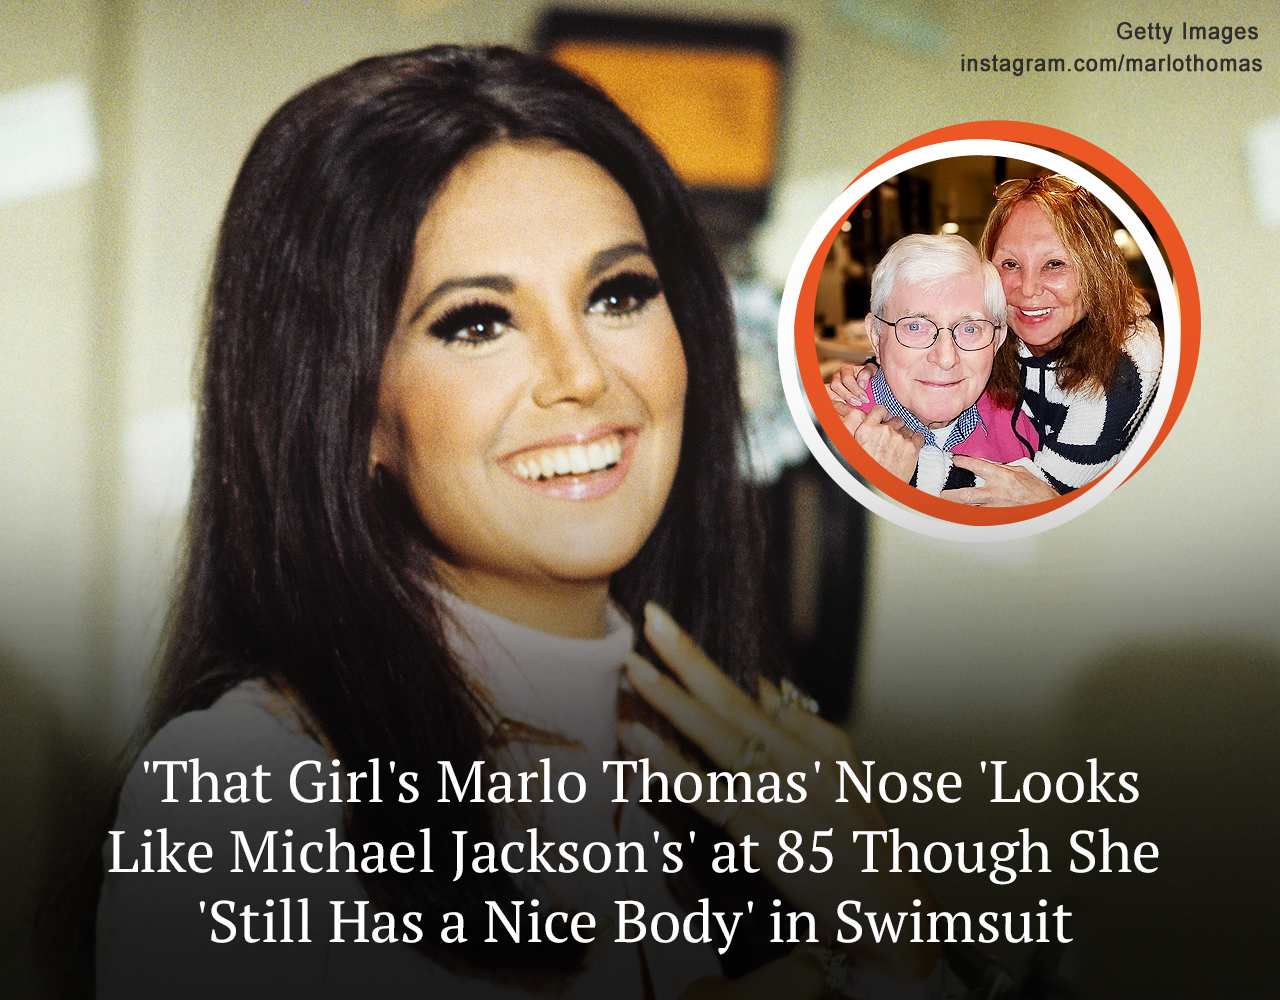 ‘That Girl’s Marlo Thomas’ Nose ‘Looks Like Michael Jackson’s’ at 85 Though She ‘Still Has a Nice Body’ in Swimsuit